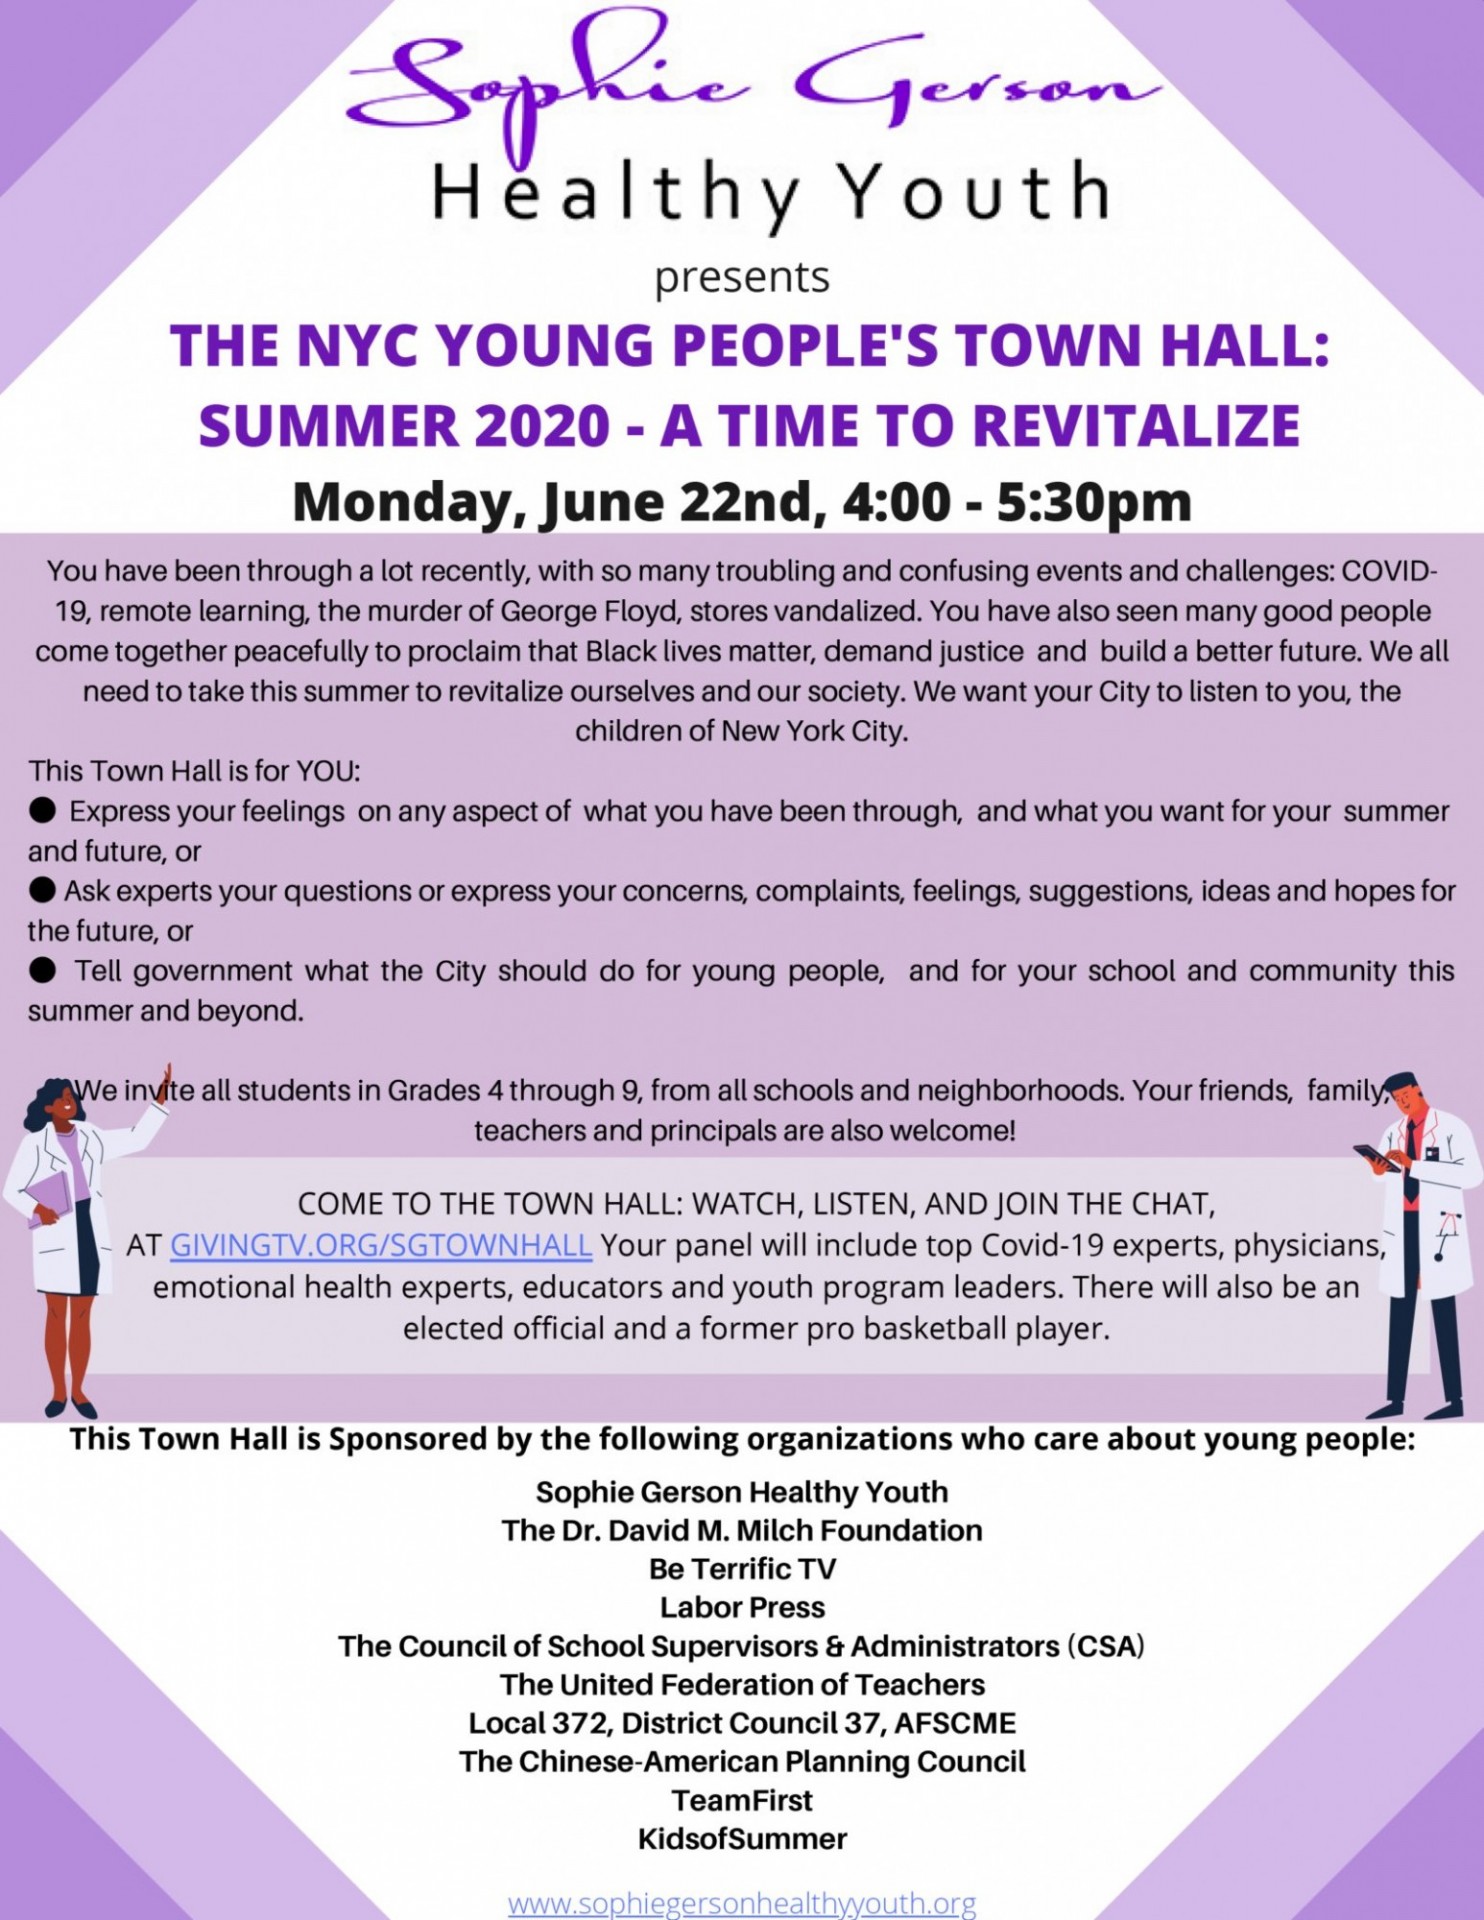 Sophie Gerson Young People's Town Hall